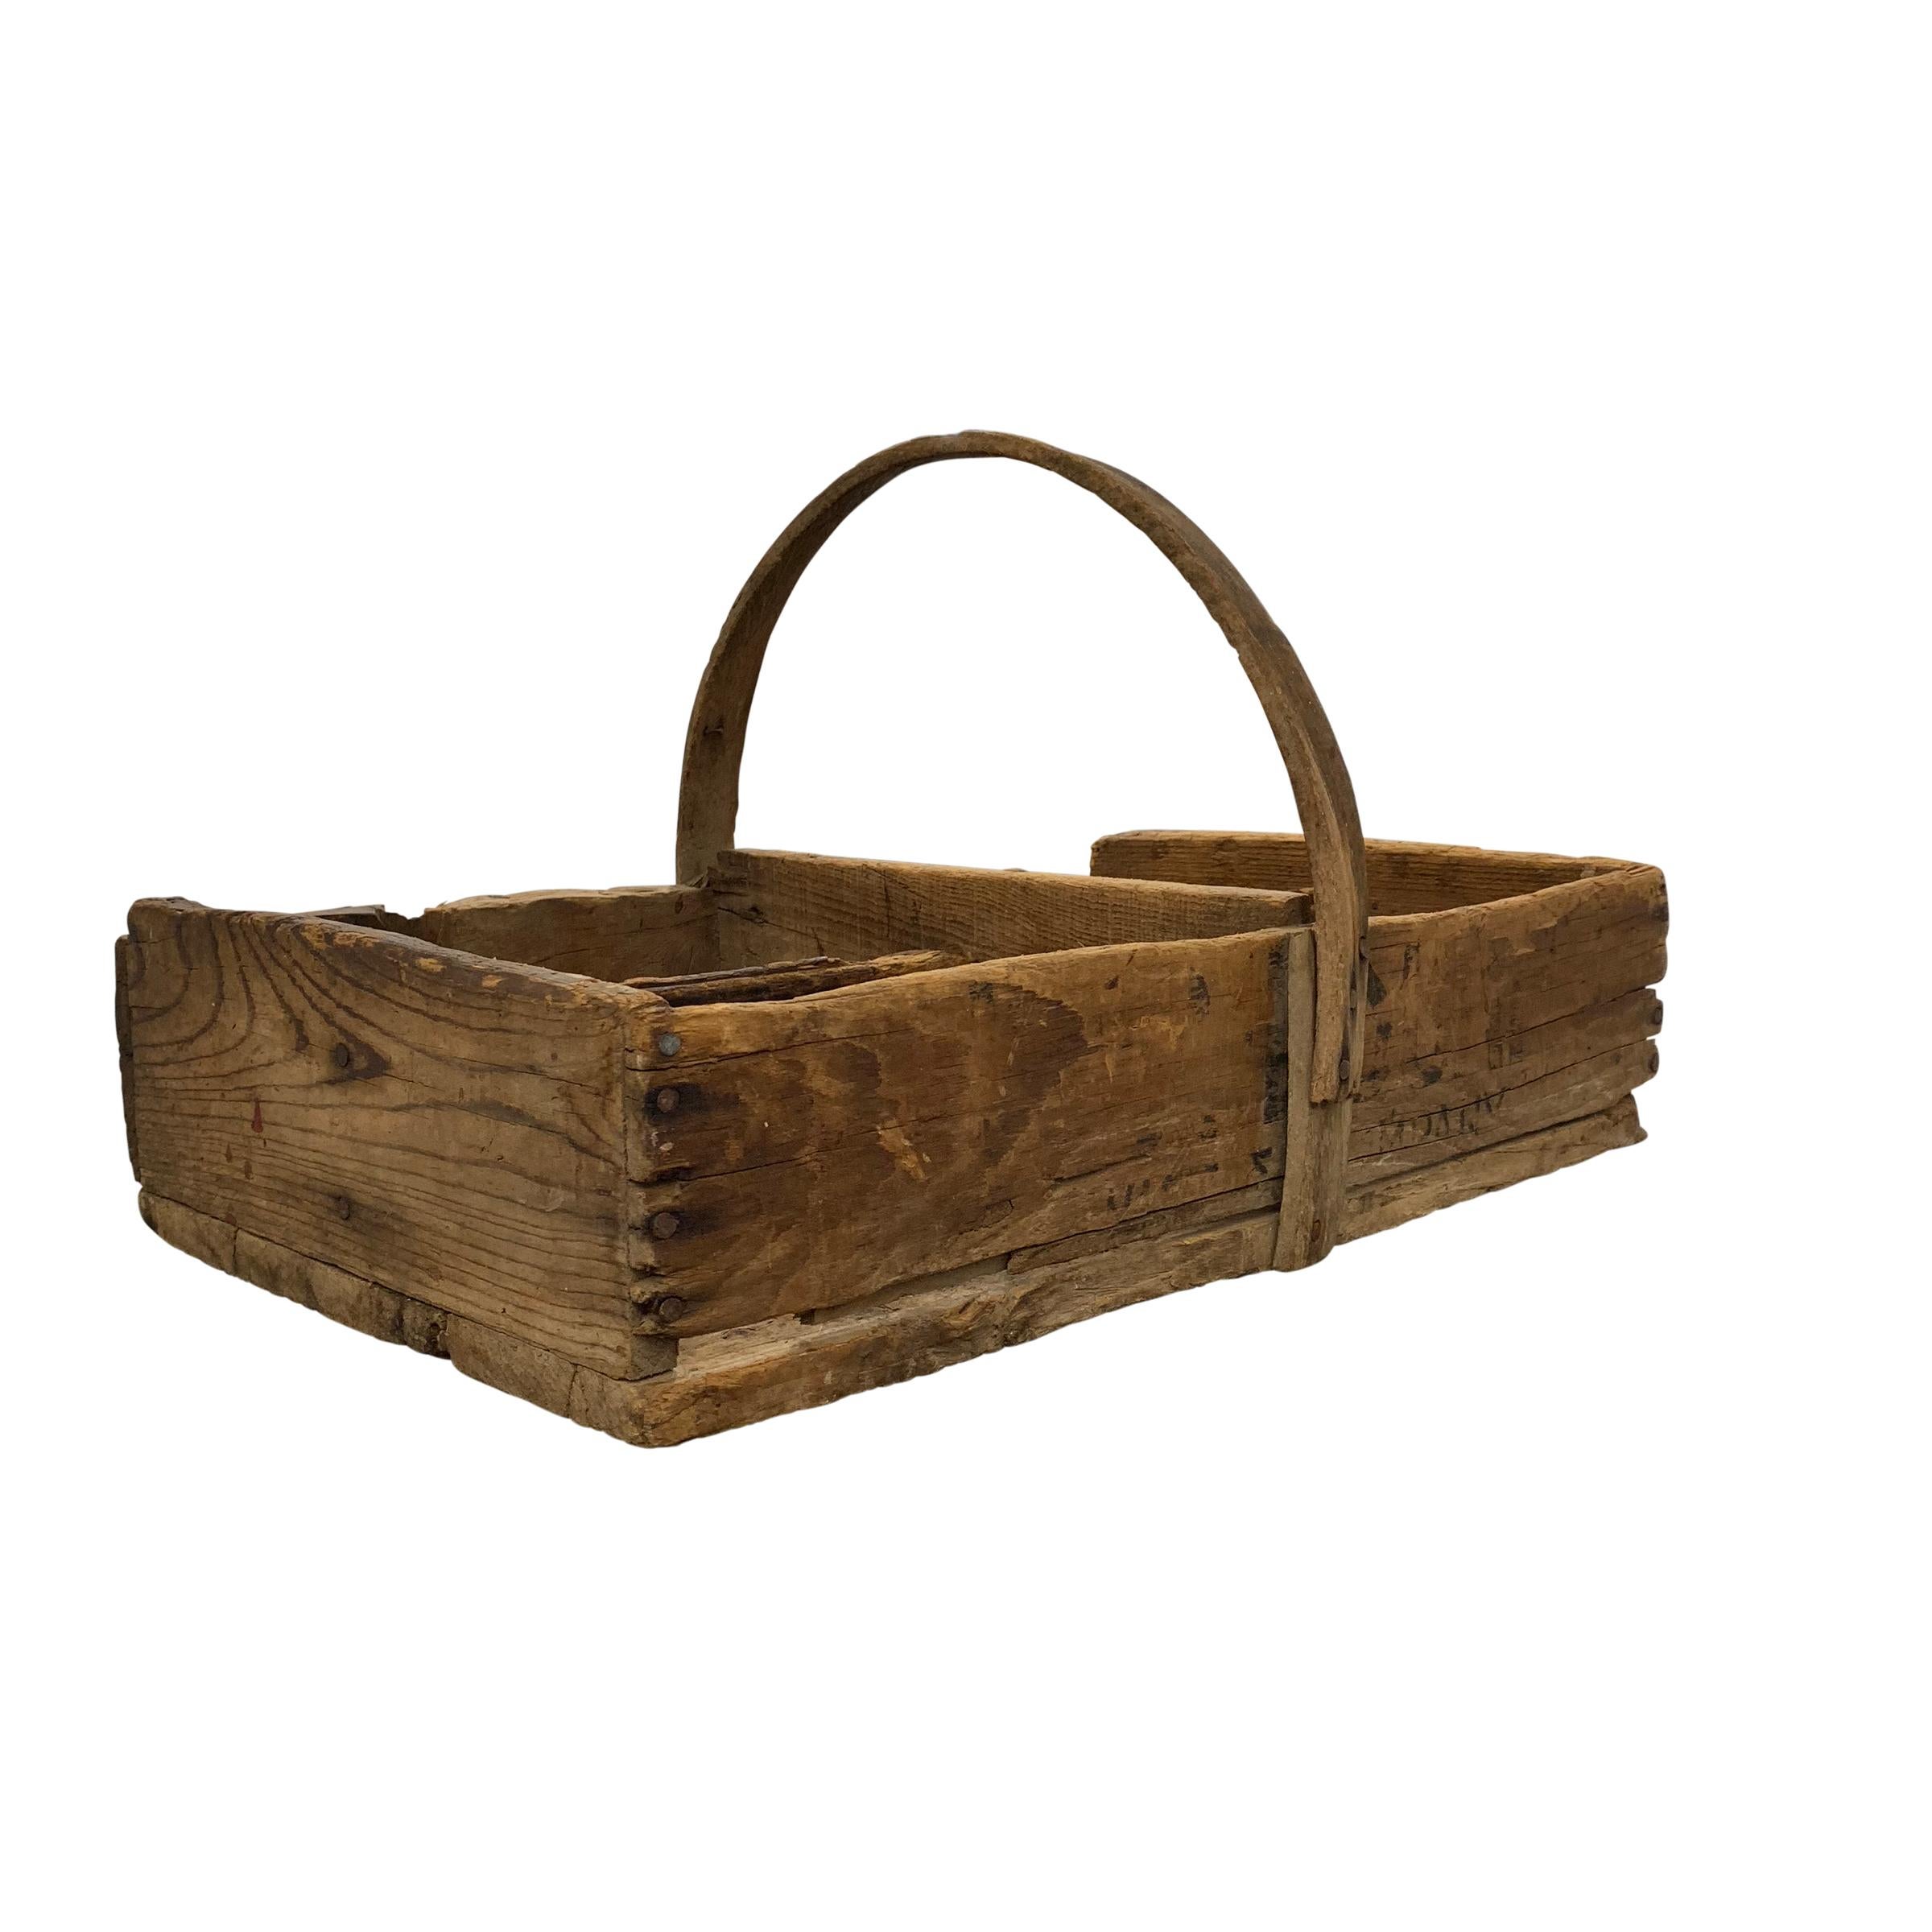 A Primitive early 20th century American wooden tool box with a bentwood handle and divided into four sections. The wear and patina are excellent!